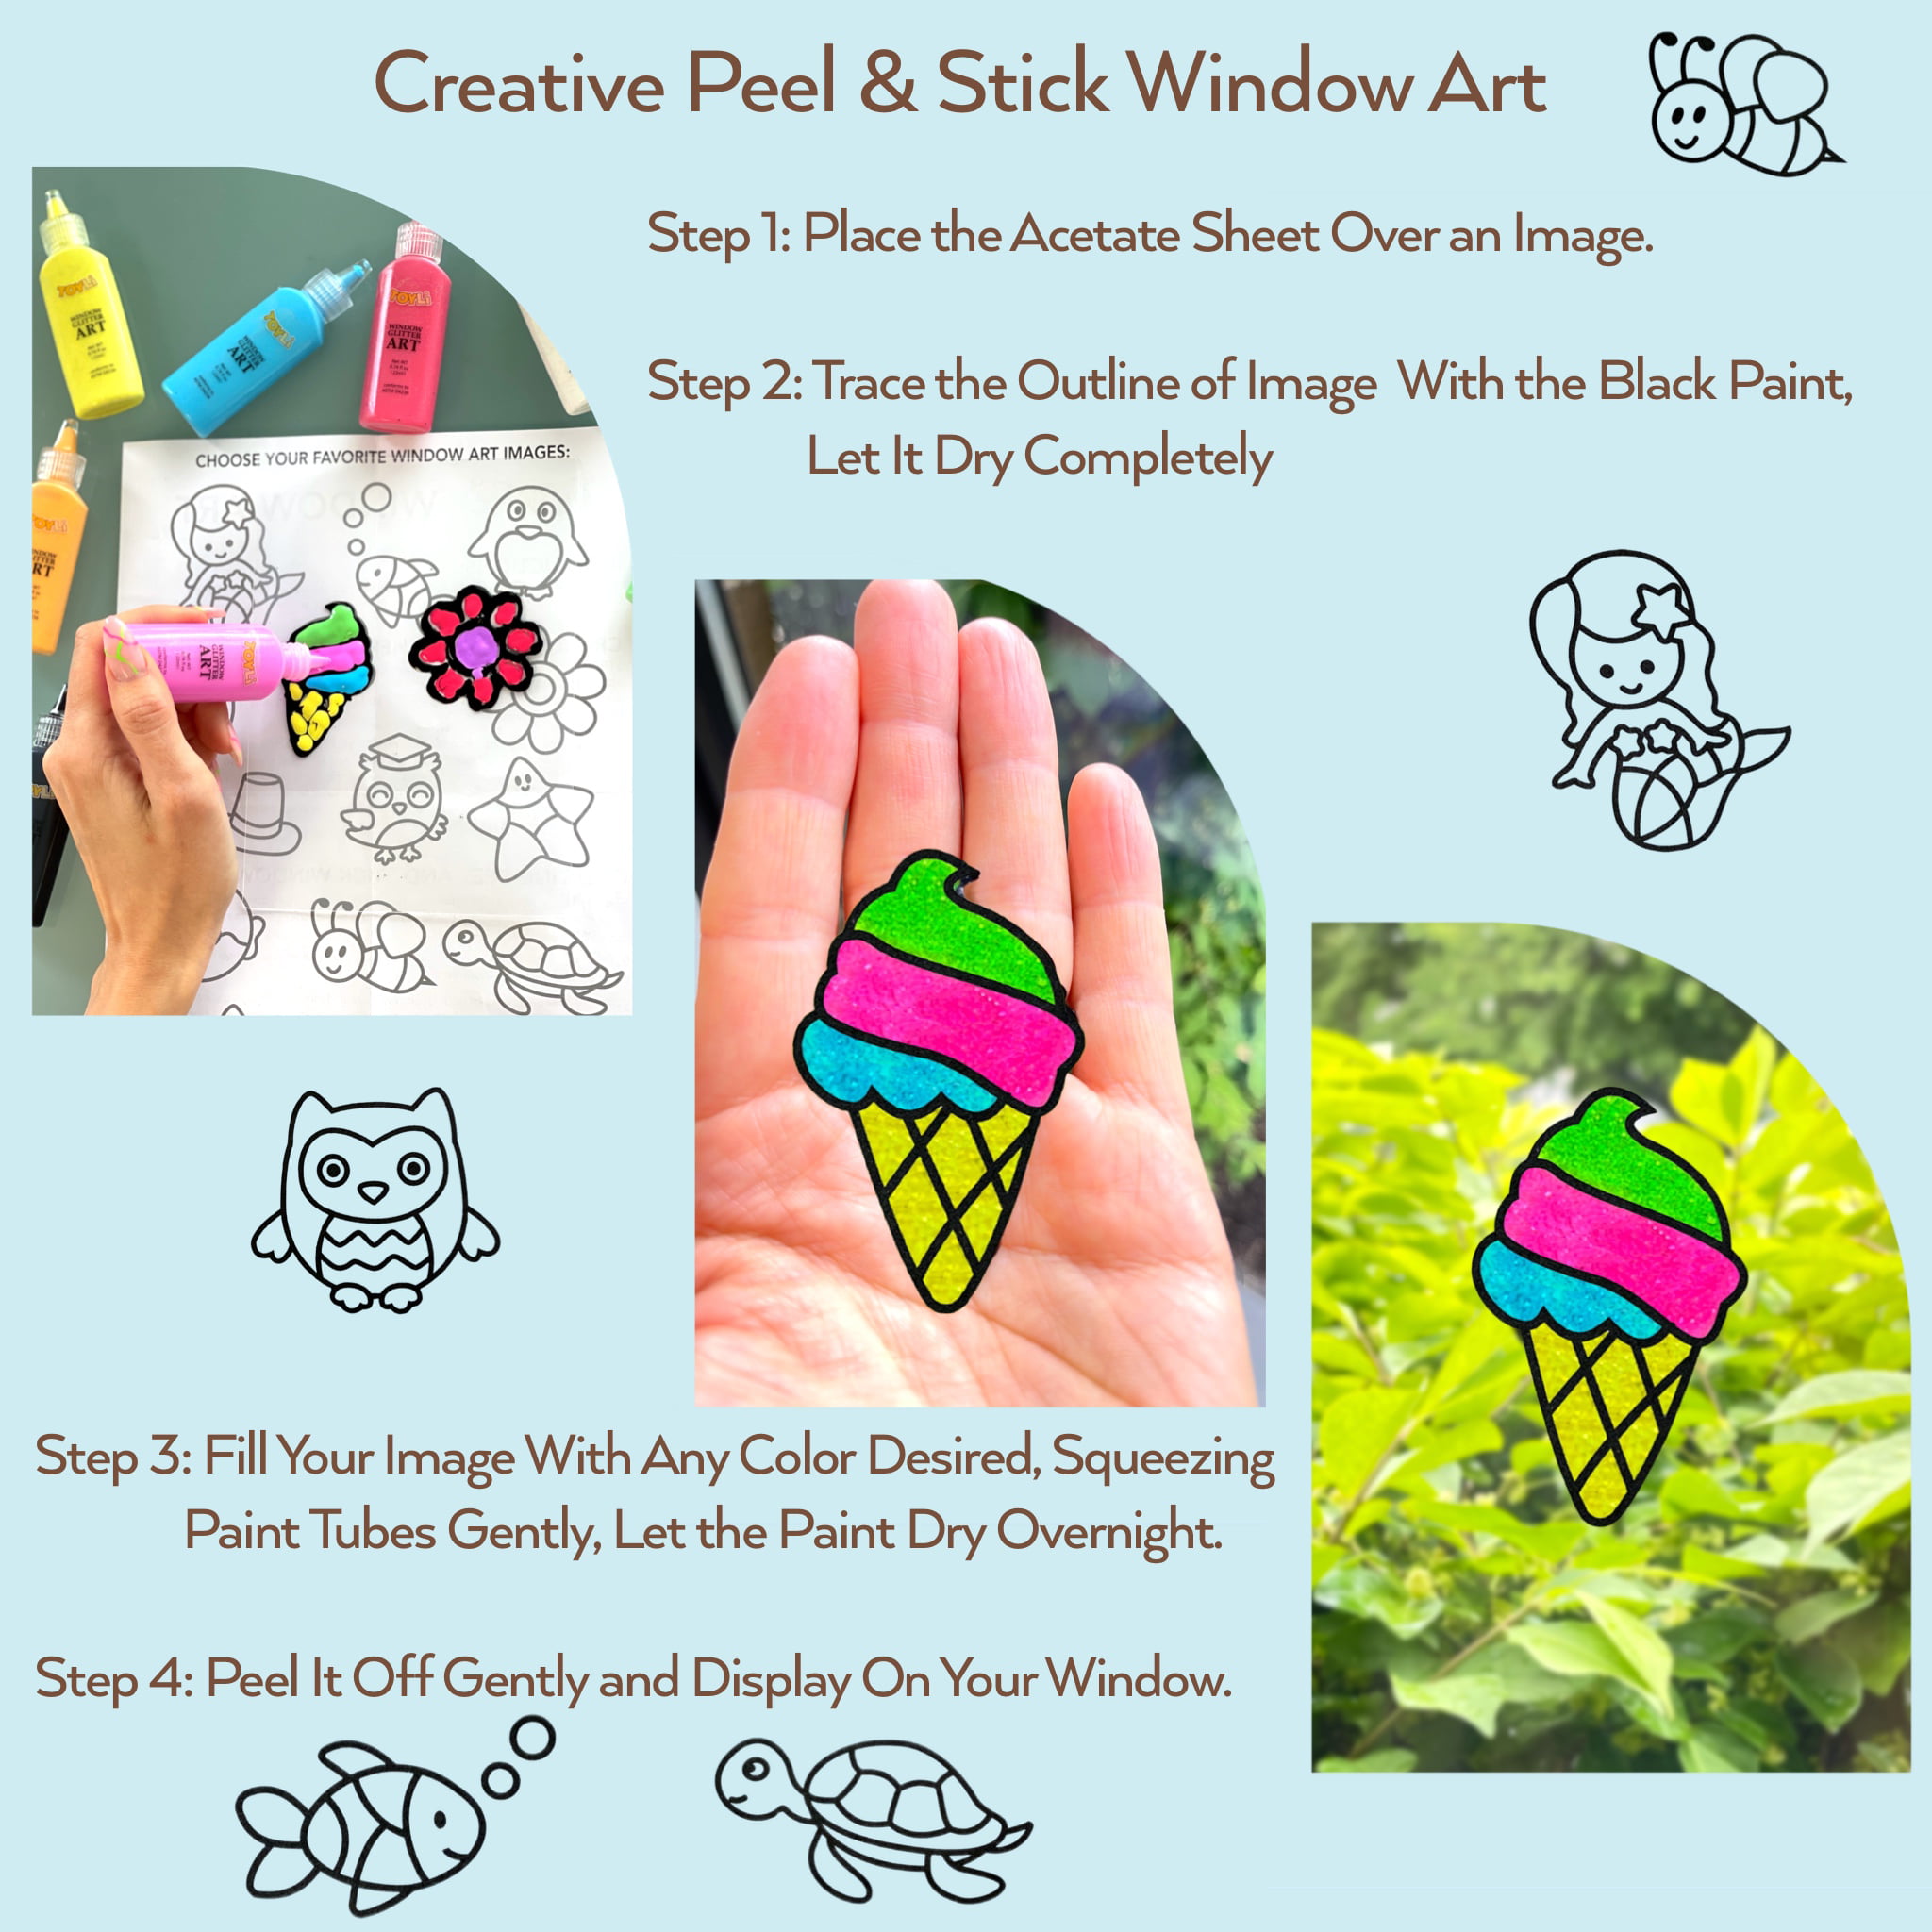  HAPMARS 4 pcs Window Art Suncatcher Kits for Kids Crafts Ages  6-8, Fun Arts and Crafts for Girls Ages 8-12, Creative Activity DIY Toys,  Birthday Gifts for 7 Year Old Girl(Rainbow) 